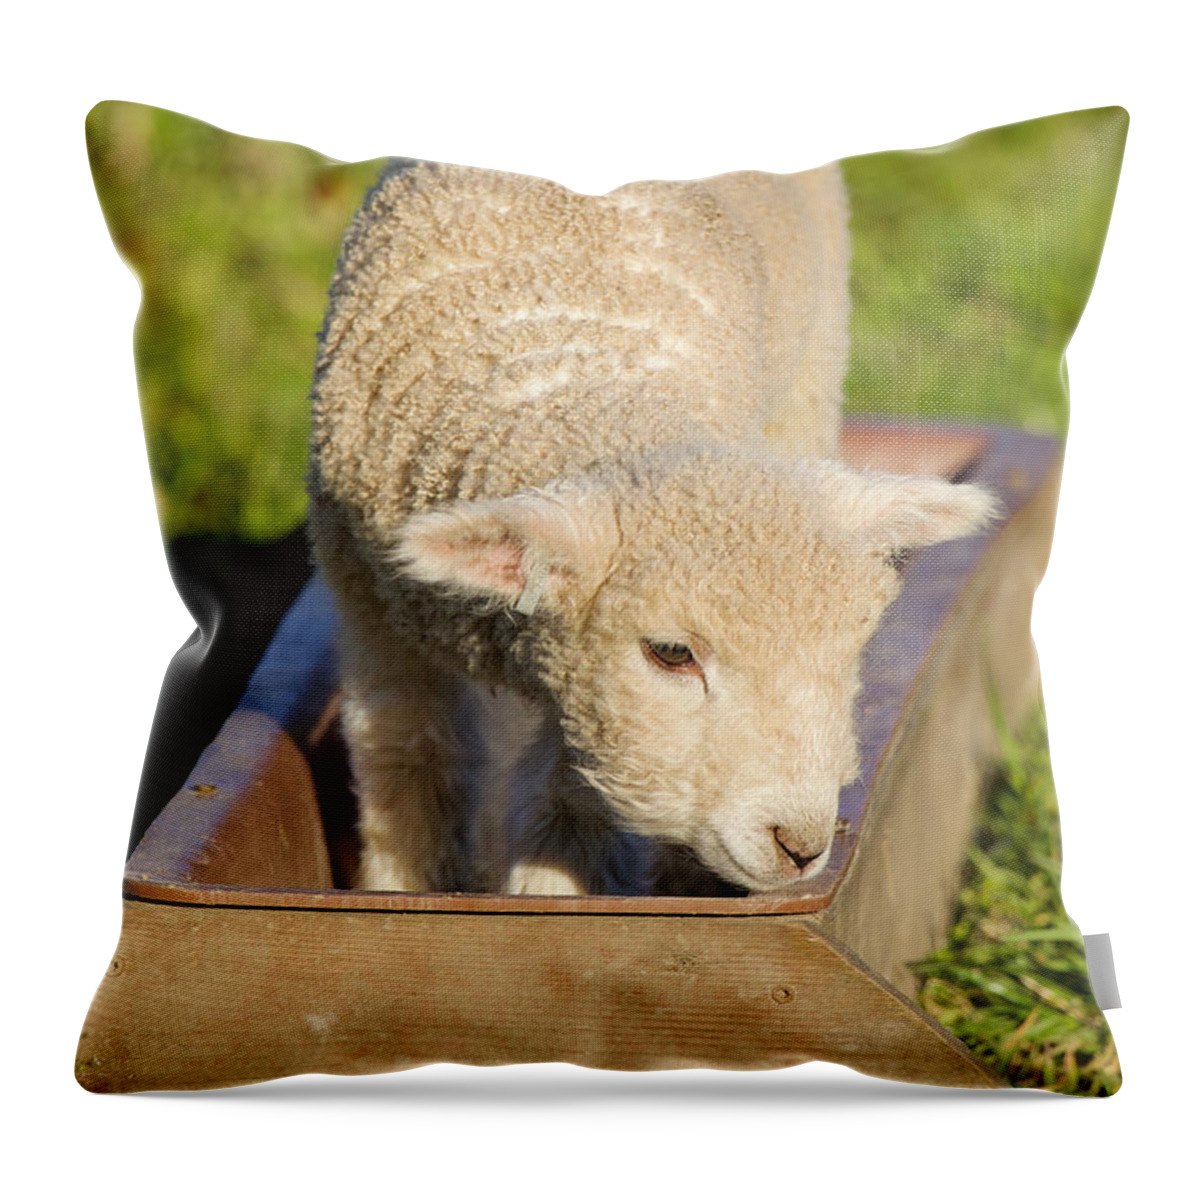 Lamb Throw Pillow featuring the photograph Colonial Lamb in a Feeding Trough by Rachel Morrison